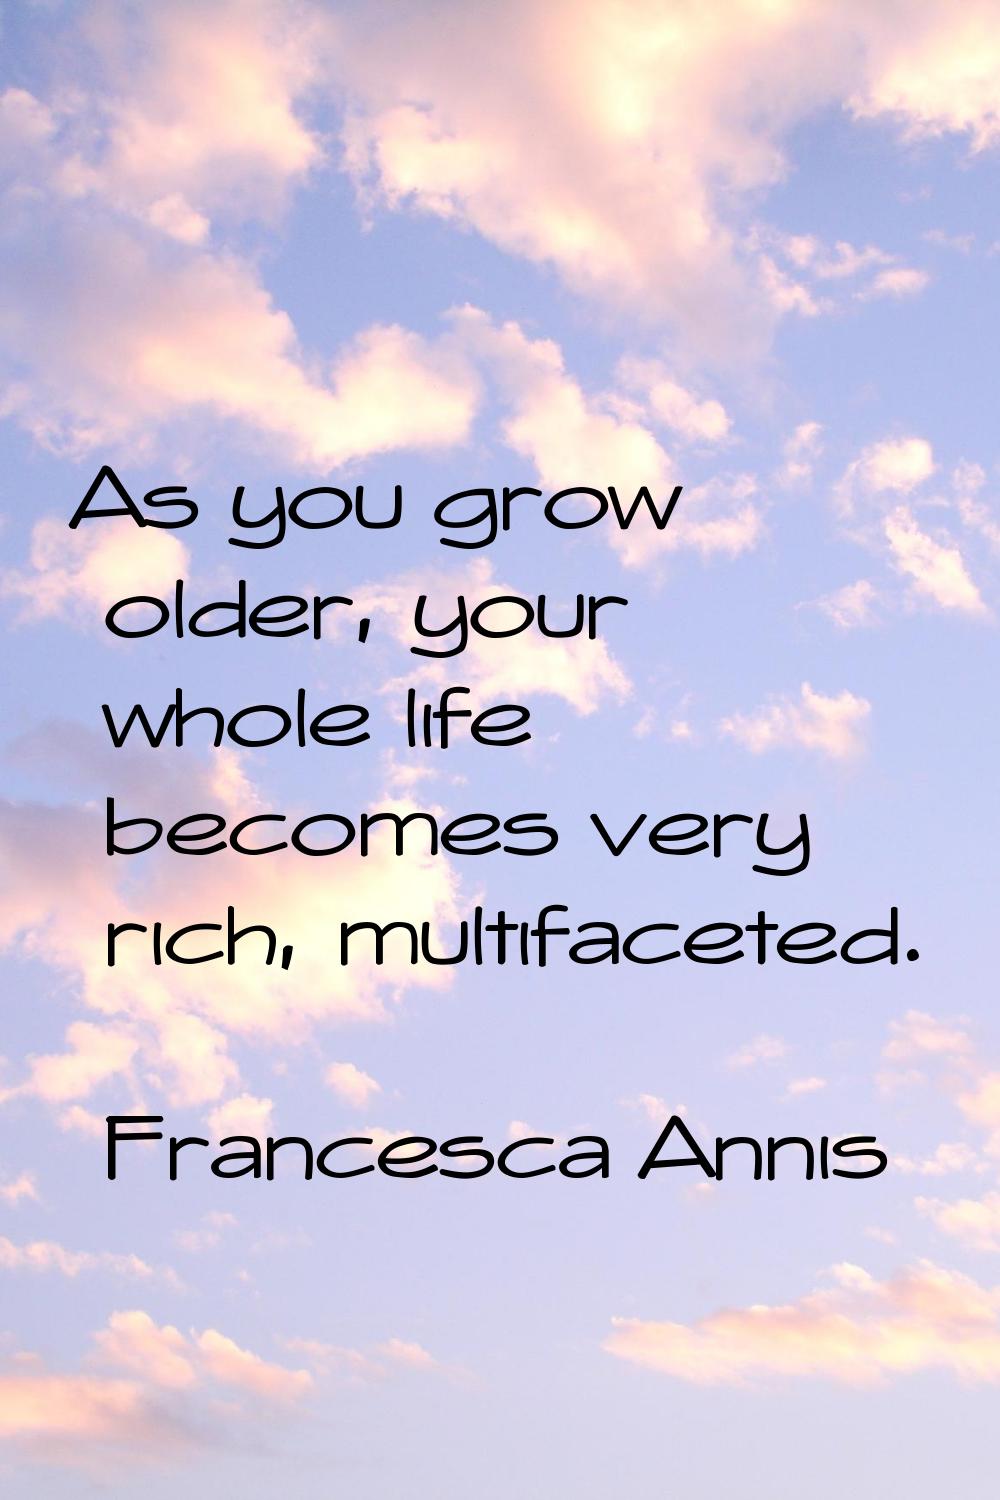 As you grow older, your whole life becomes very rich, multifaceted.